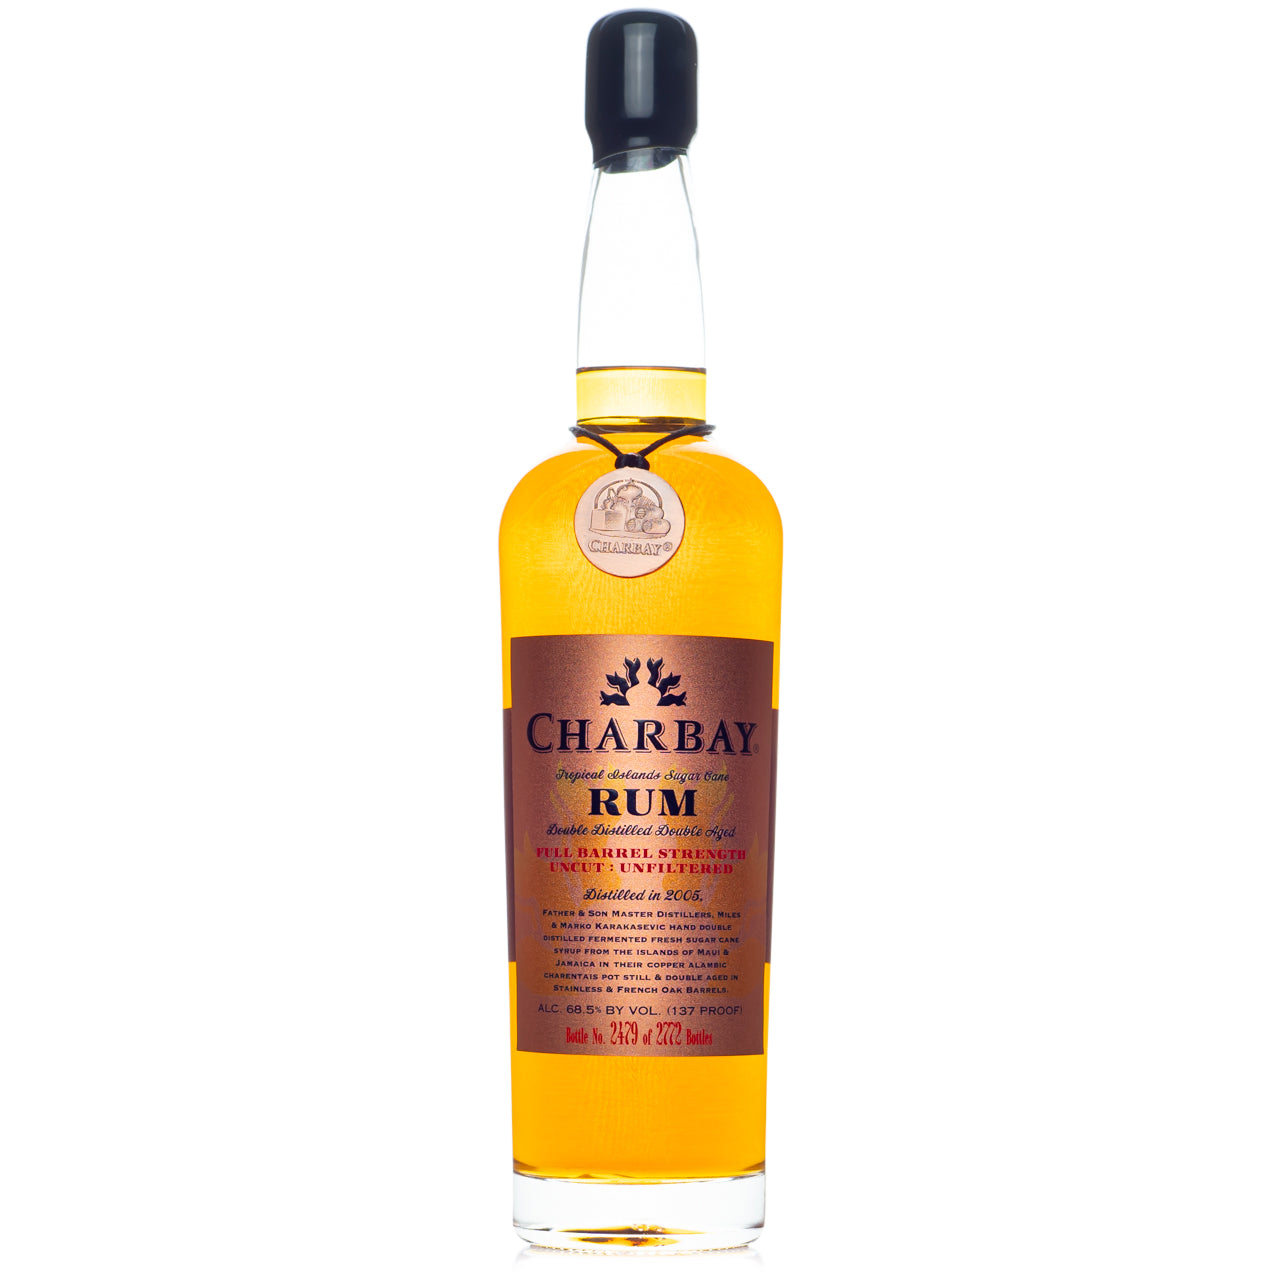 Charbay Double Aged 2005 Barrel Strength Rum